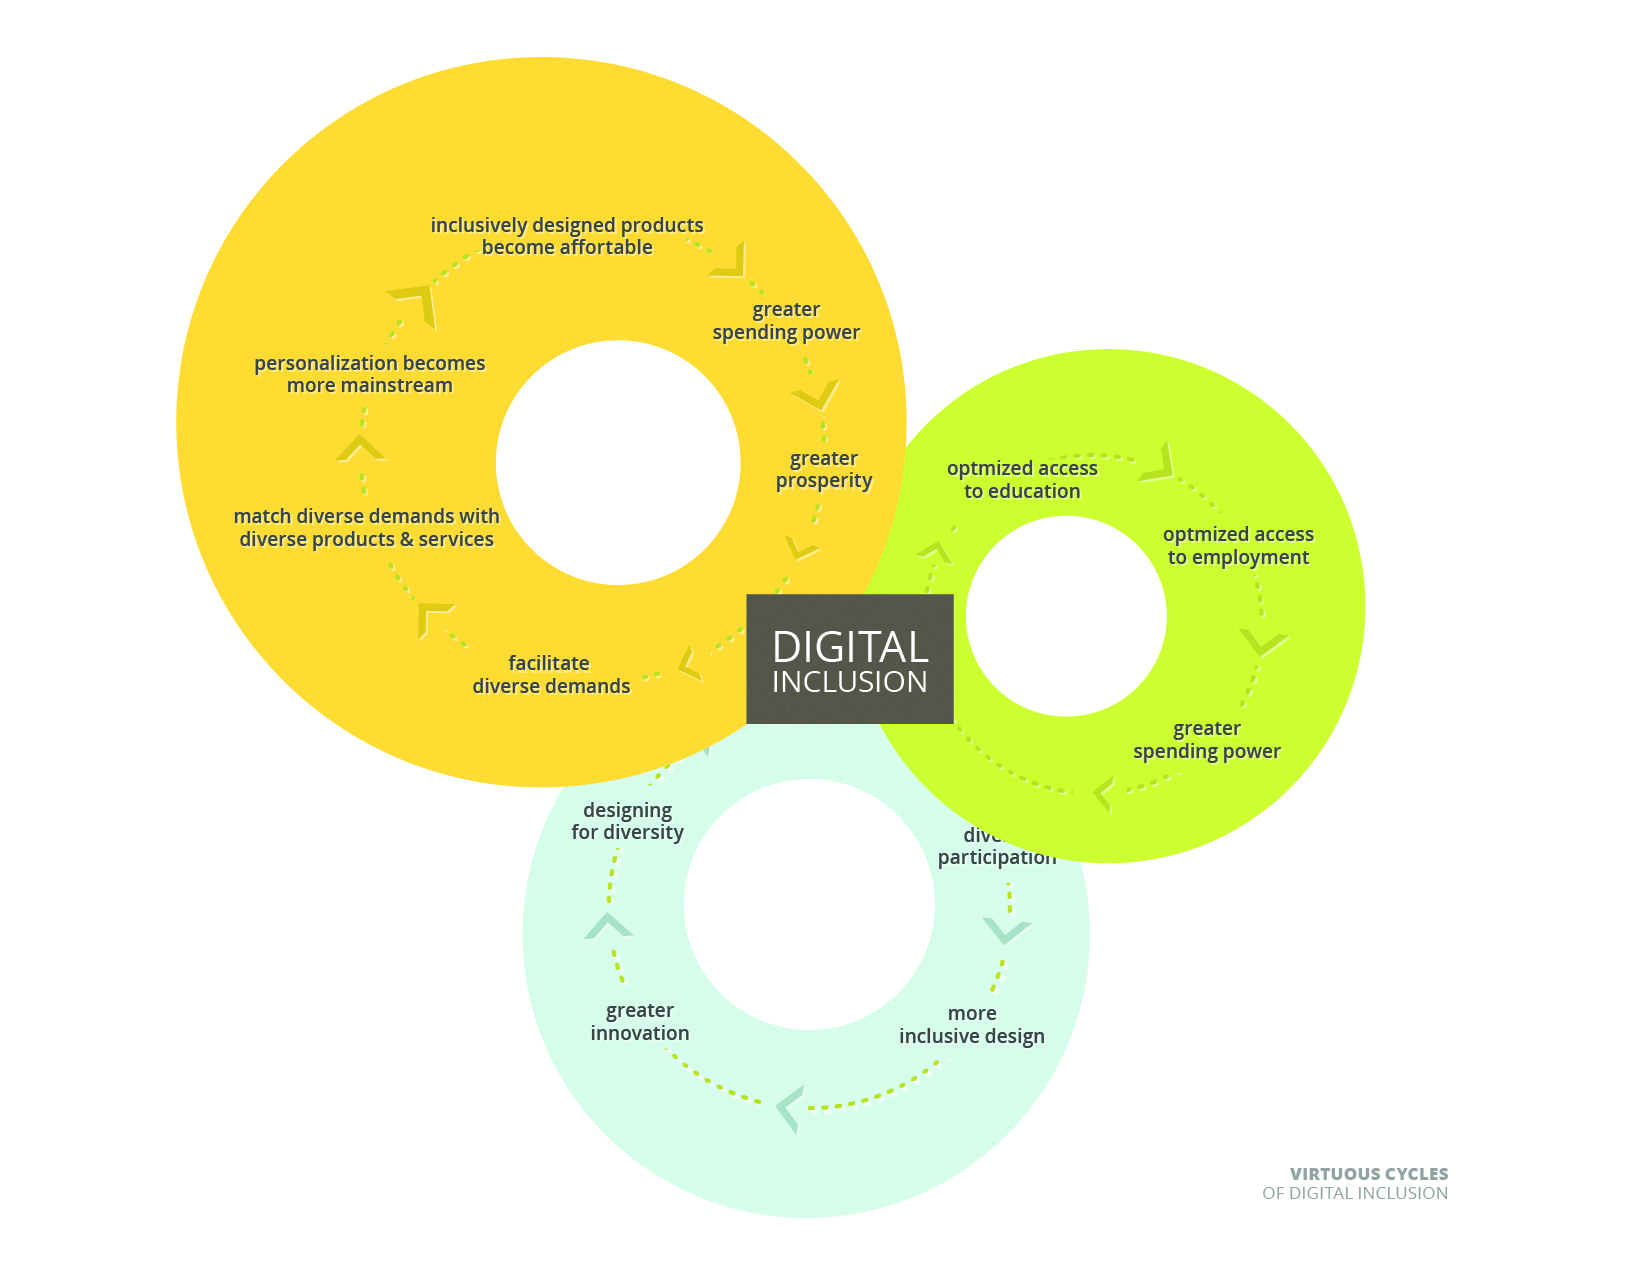 Diagram showing the virtuous cycles as a result of digital inclusion.